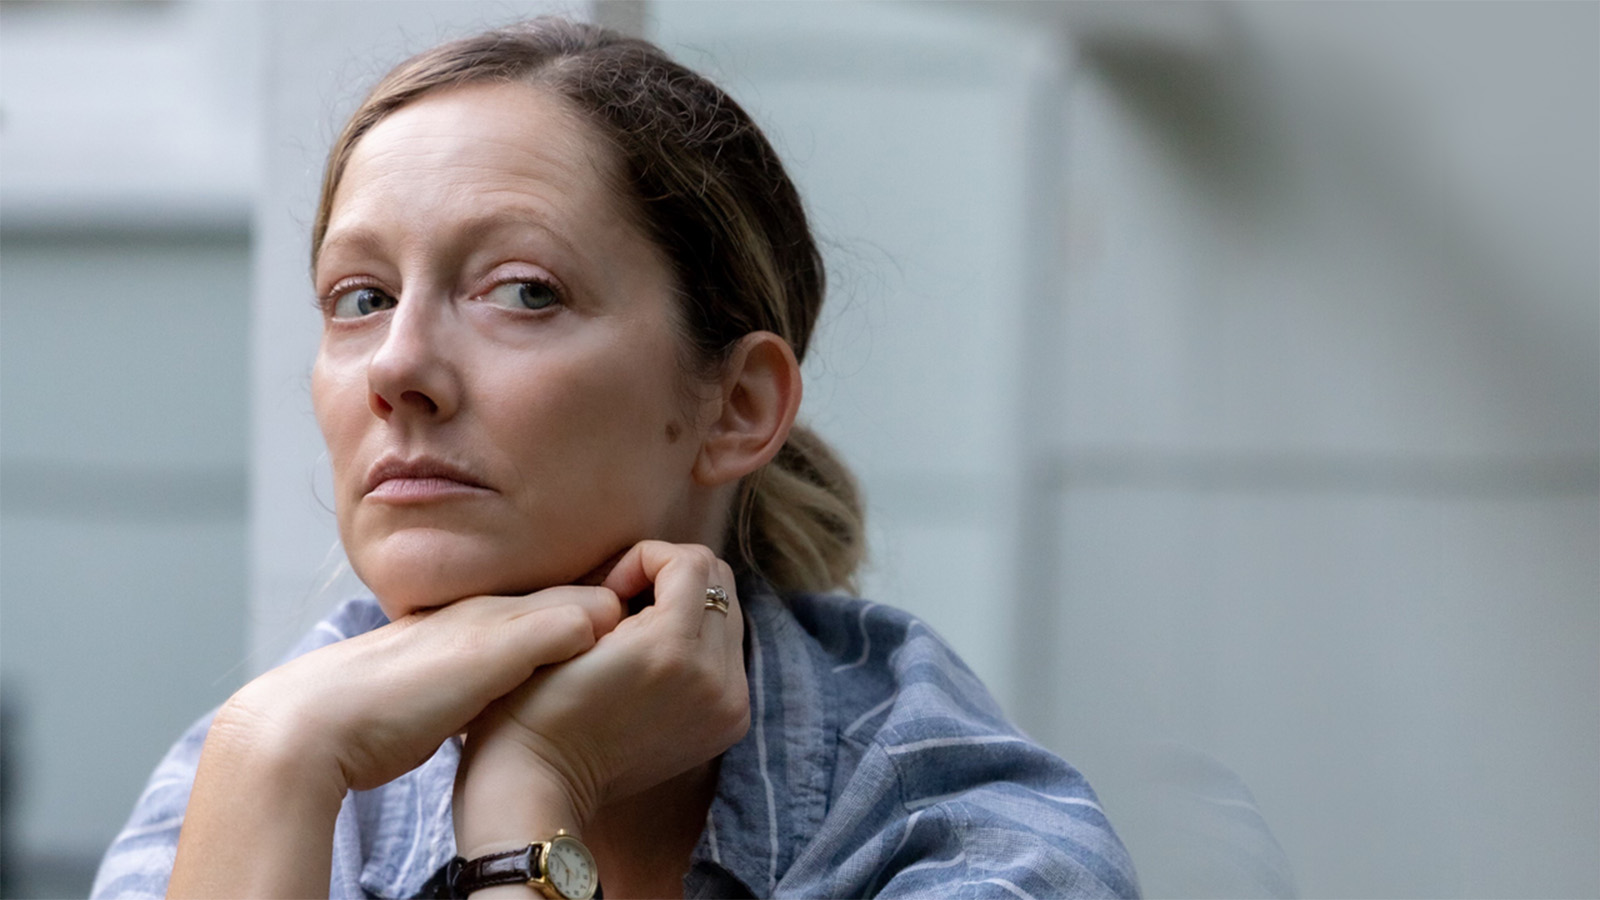 Judy Greer looks for solace in a fractured community.